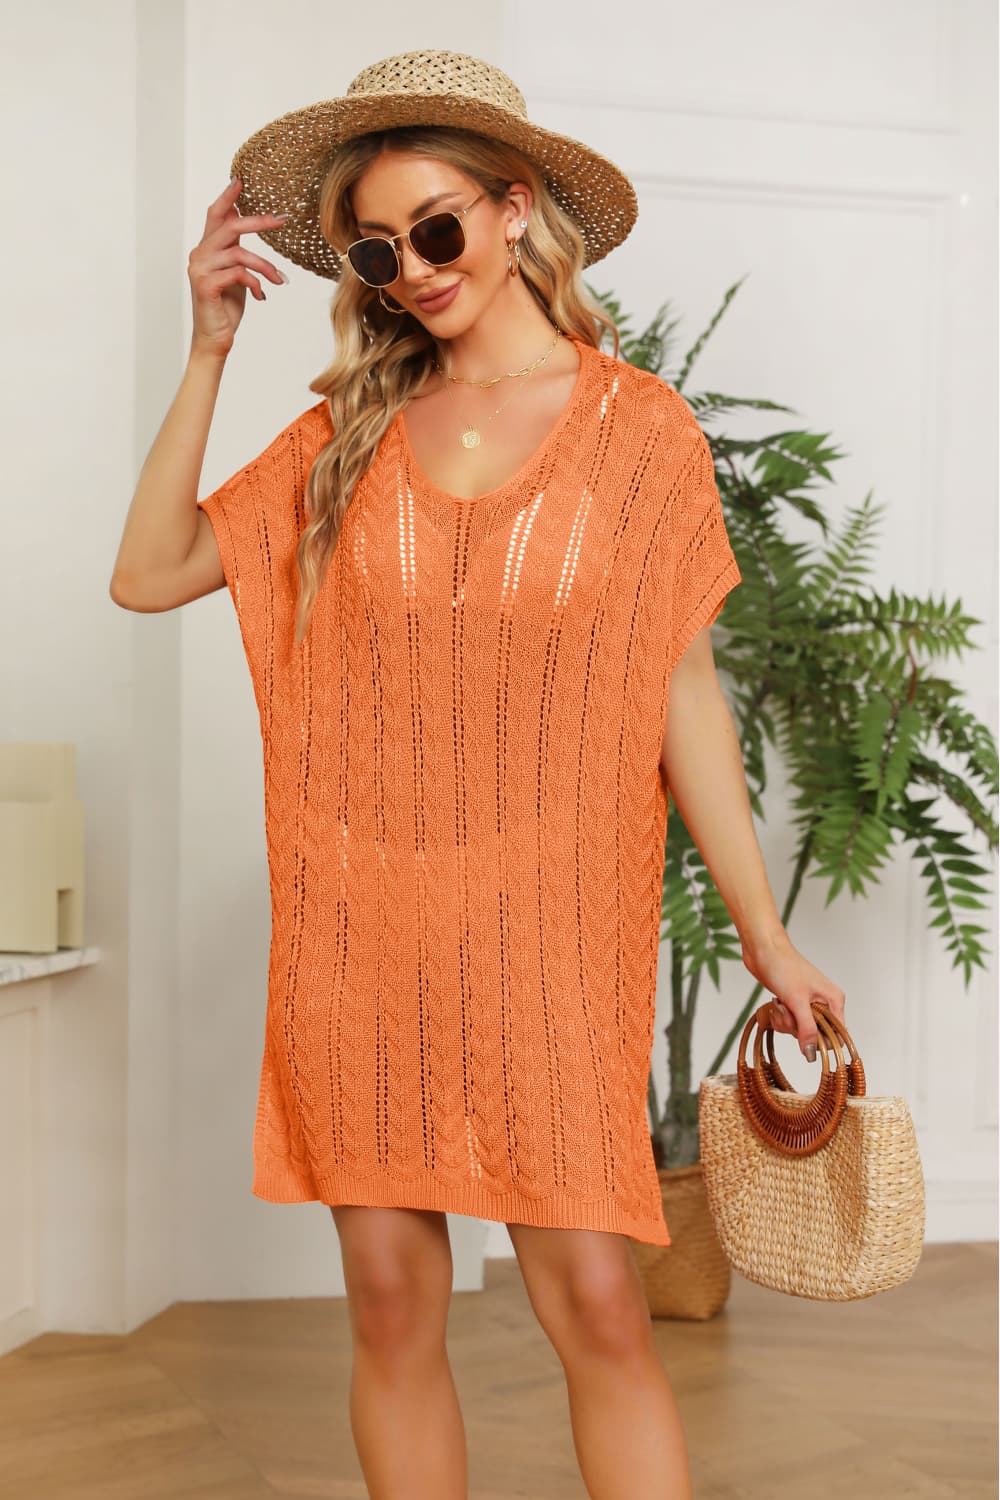 Openwork Side Slit Knit Dress- ONLINE ONLY 2-10 DAY SHIPPING